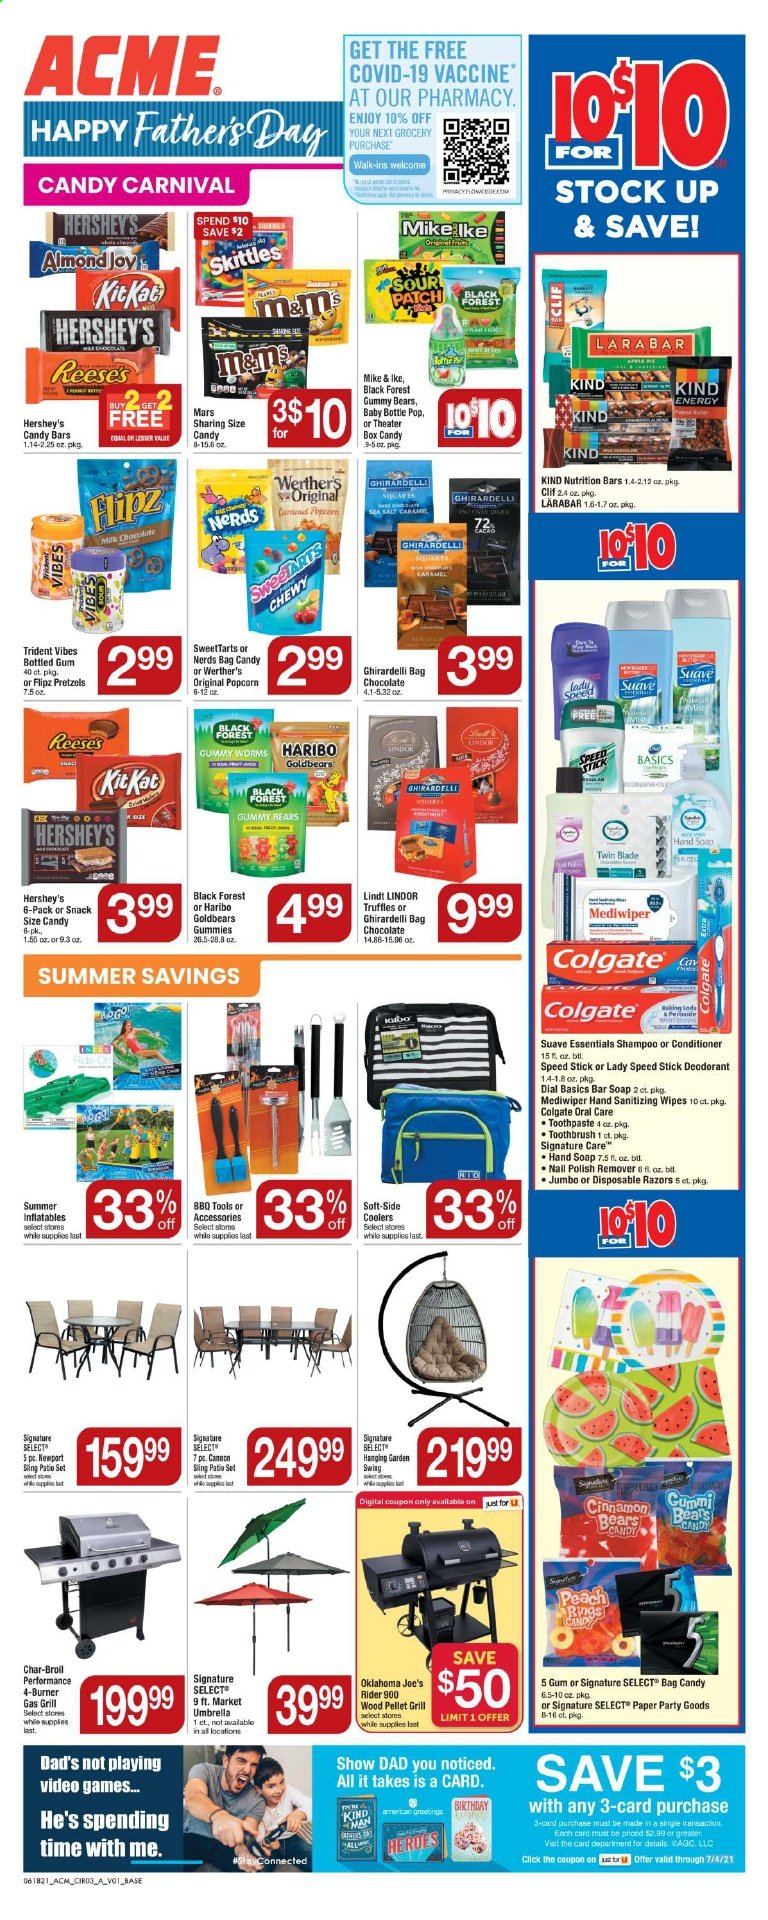 thumbnail - ACME Flyer - 06/18/2021 - 06/24/2021 - Sales products - pretzels, Reese's, Hershey's, chocolate, Haribo, Lindt, Lindor, Mars, truffles, Skittles, Trident, Ghirardelli, sour patch, popcorn, nutrition bar, cinnamon, wipes, antiseptic wipes, Joy, shampoo, Suave, hand soap, soap bar, Dial, soap, Colgate, toothbrush, toothpaste, conditioner, anti-perspirant, Speed Stick, deodorant, disposable razor, nail polish remover, paper, bag, umbrella. Page 4.